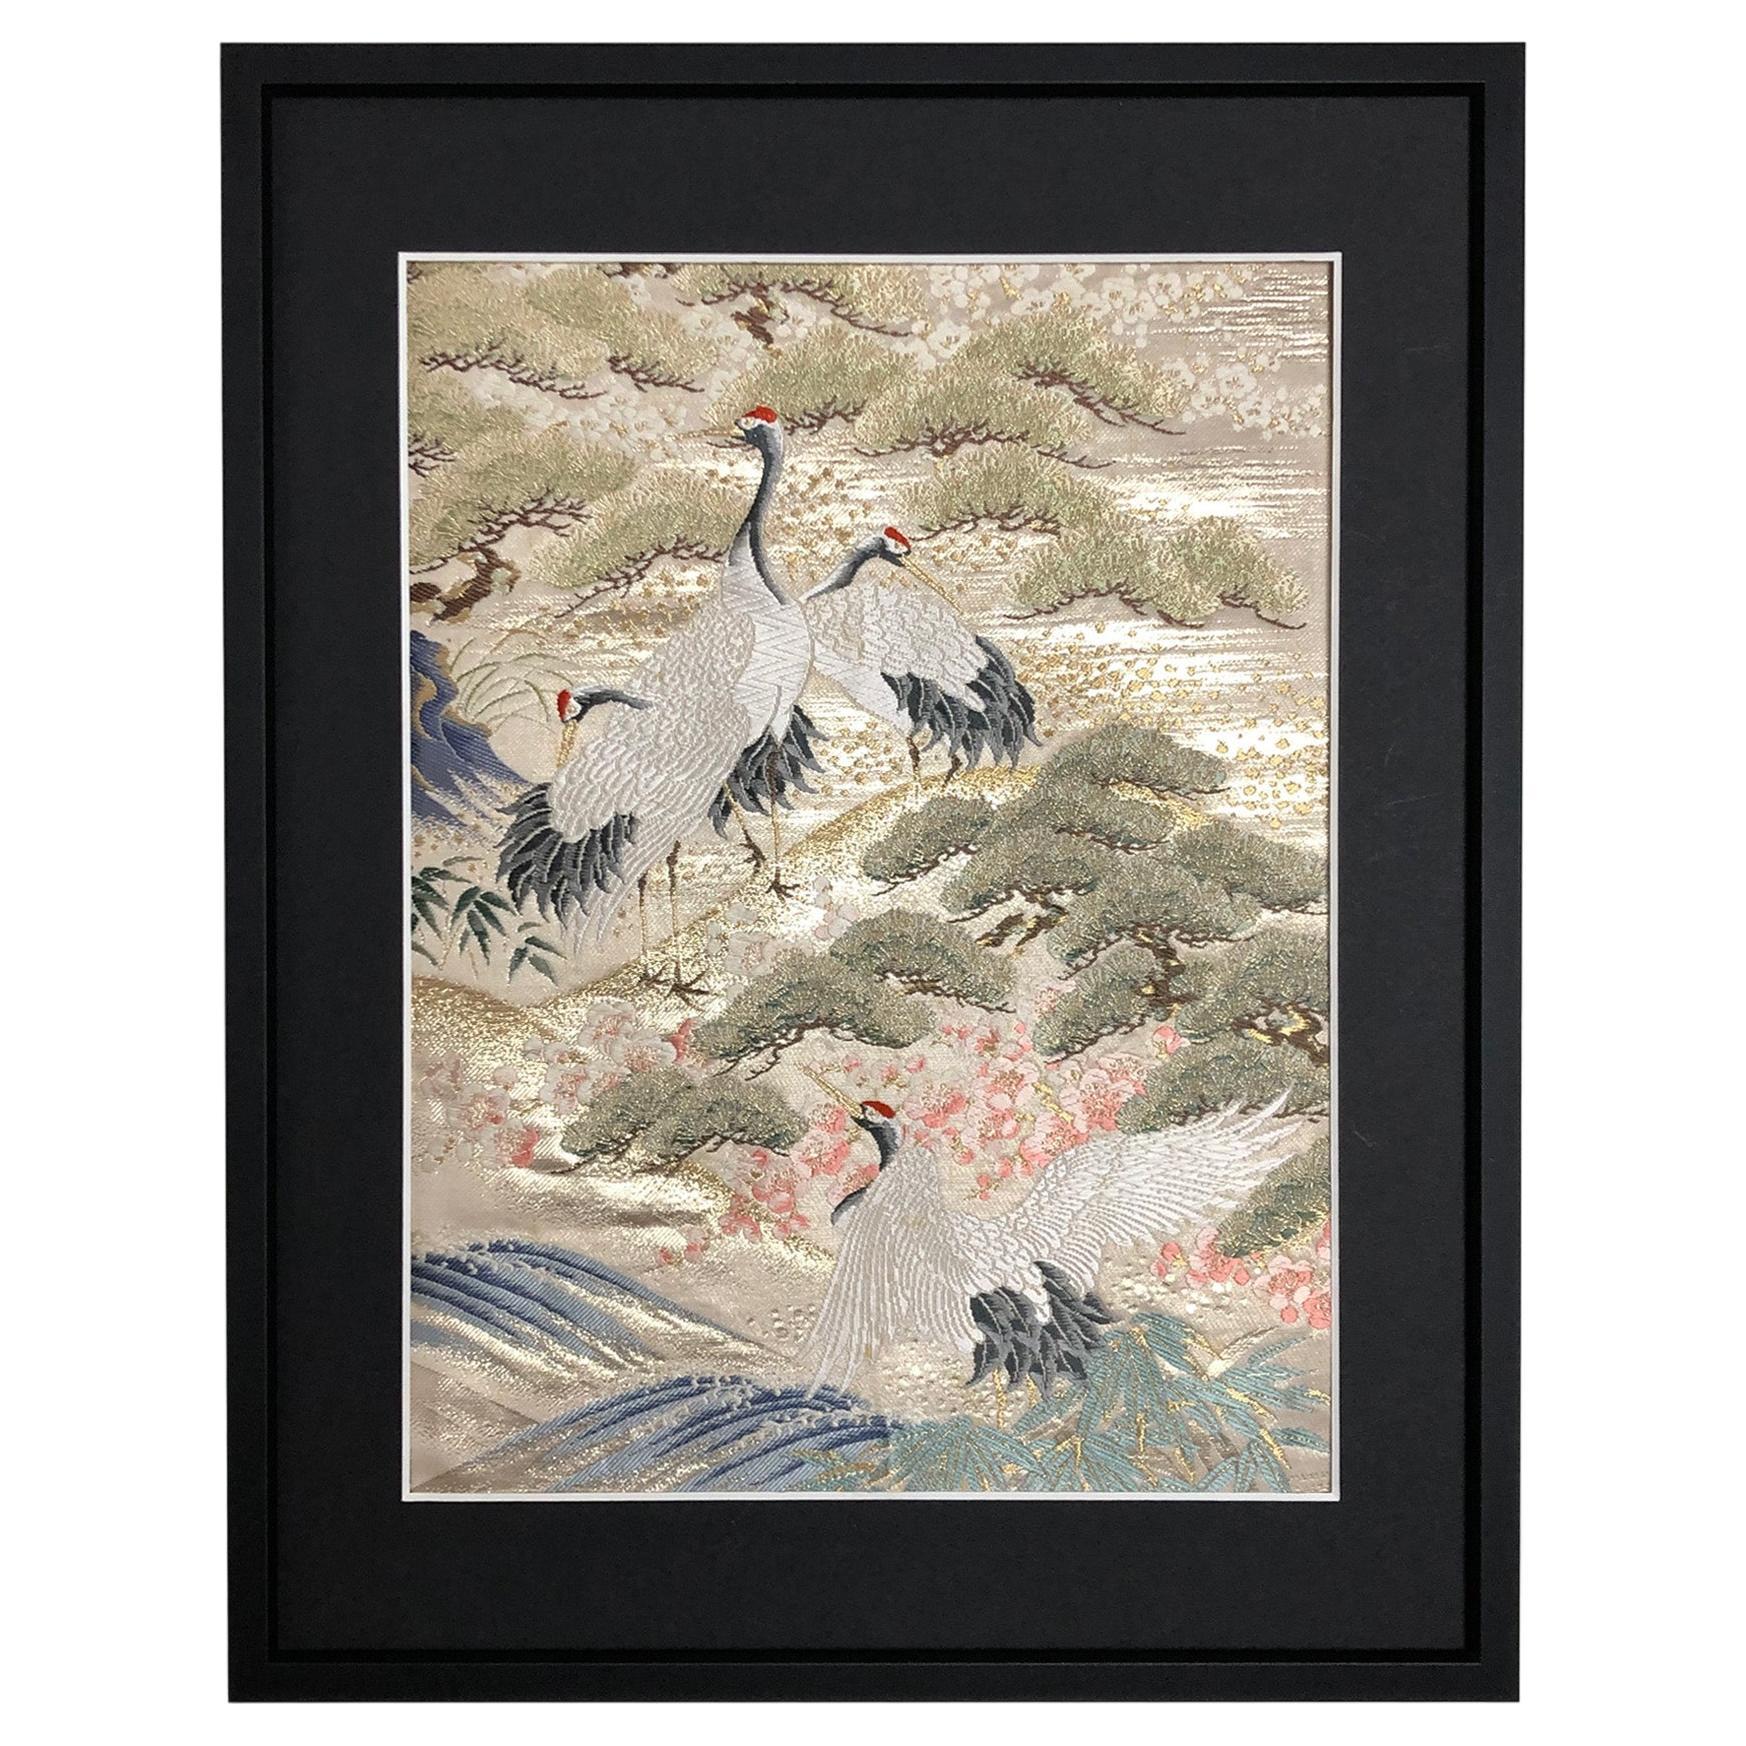 What do cranes symbolize in Japan?